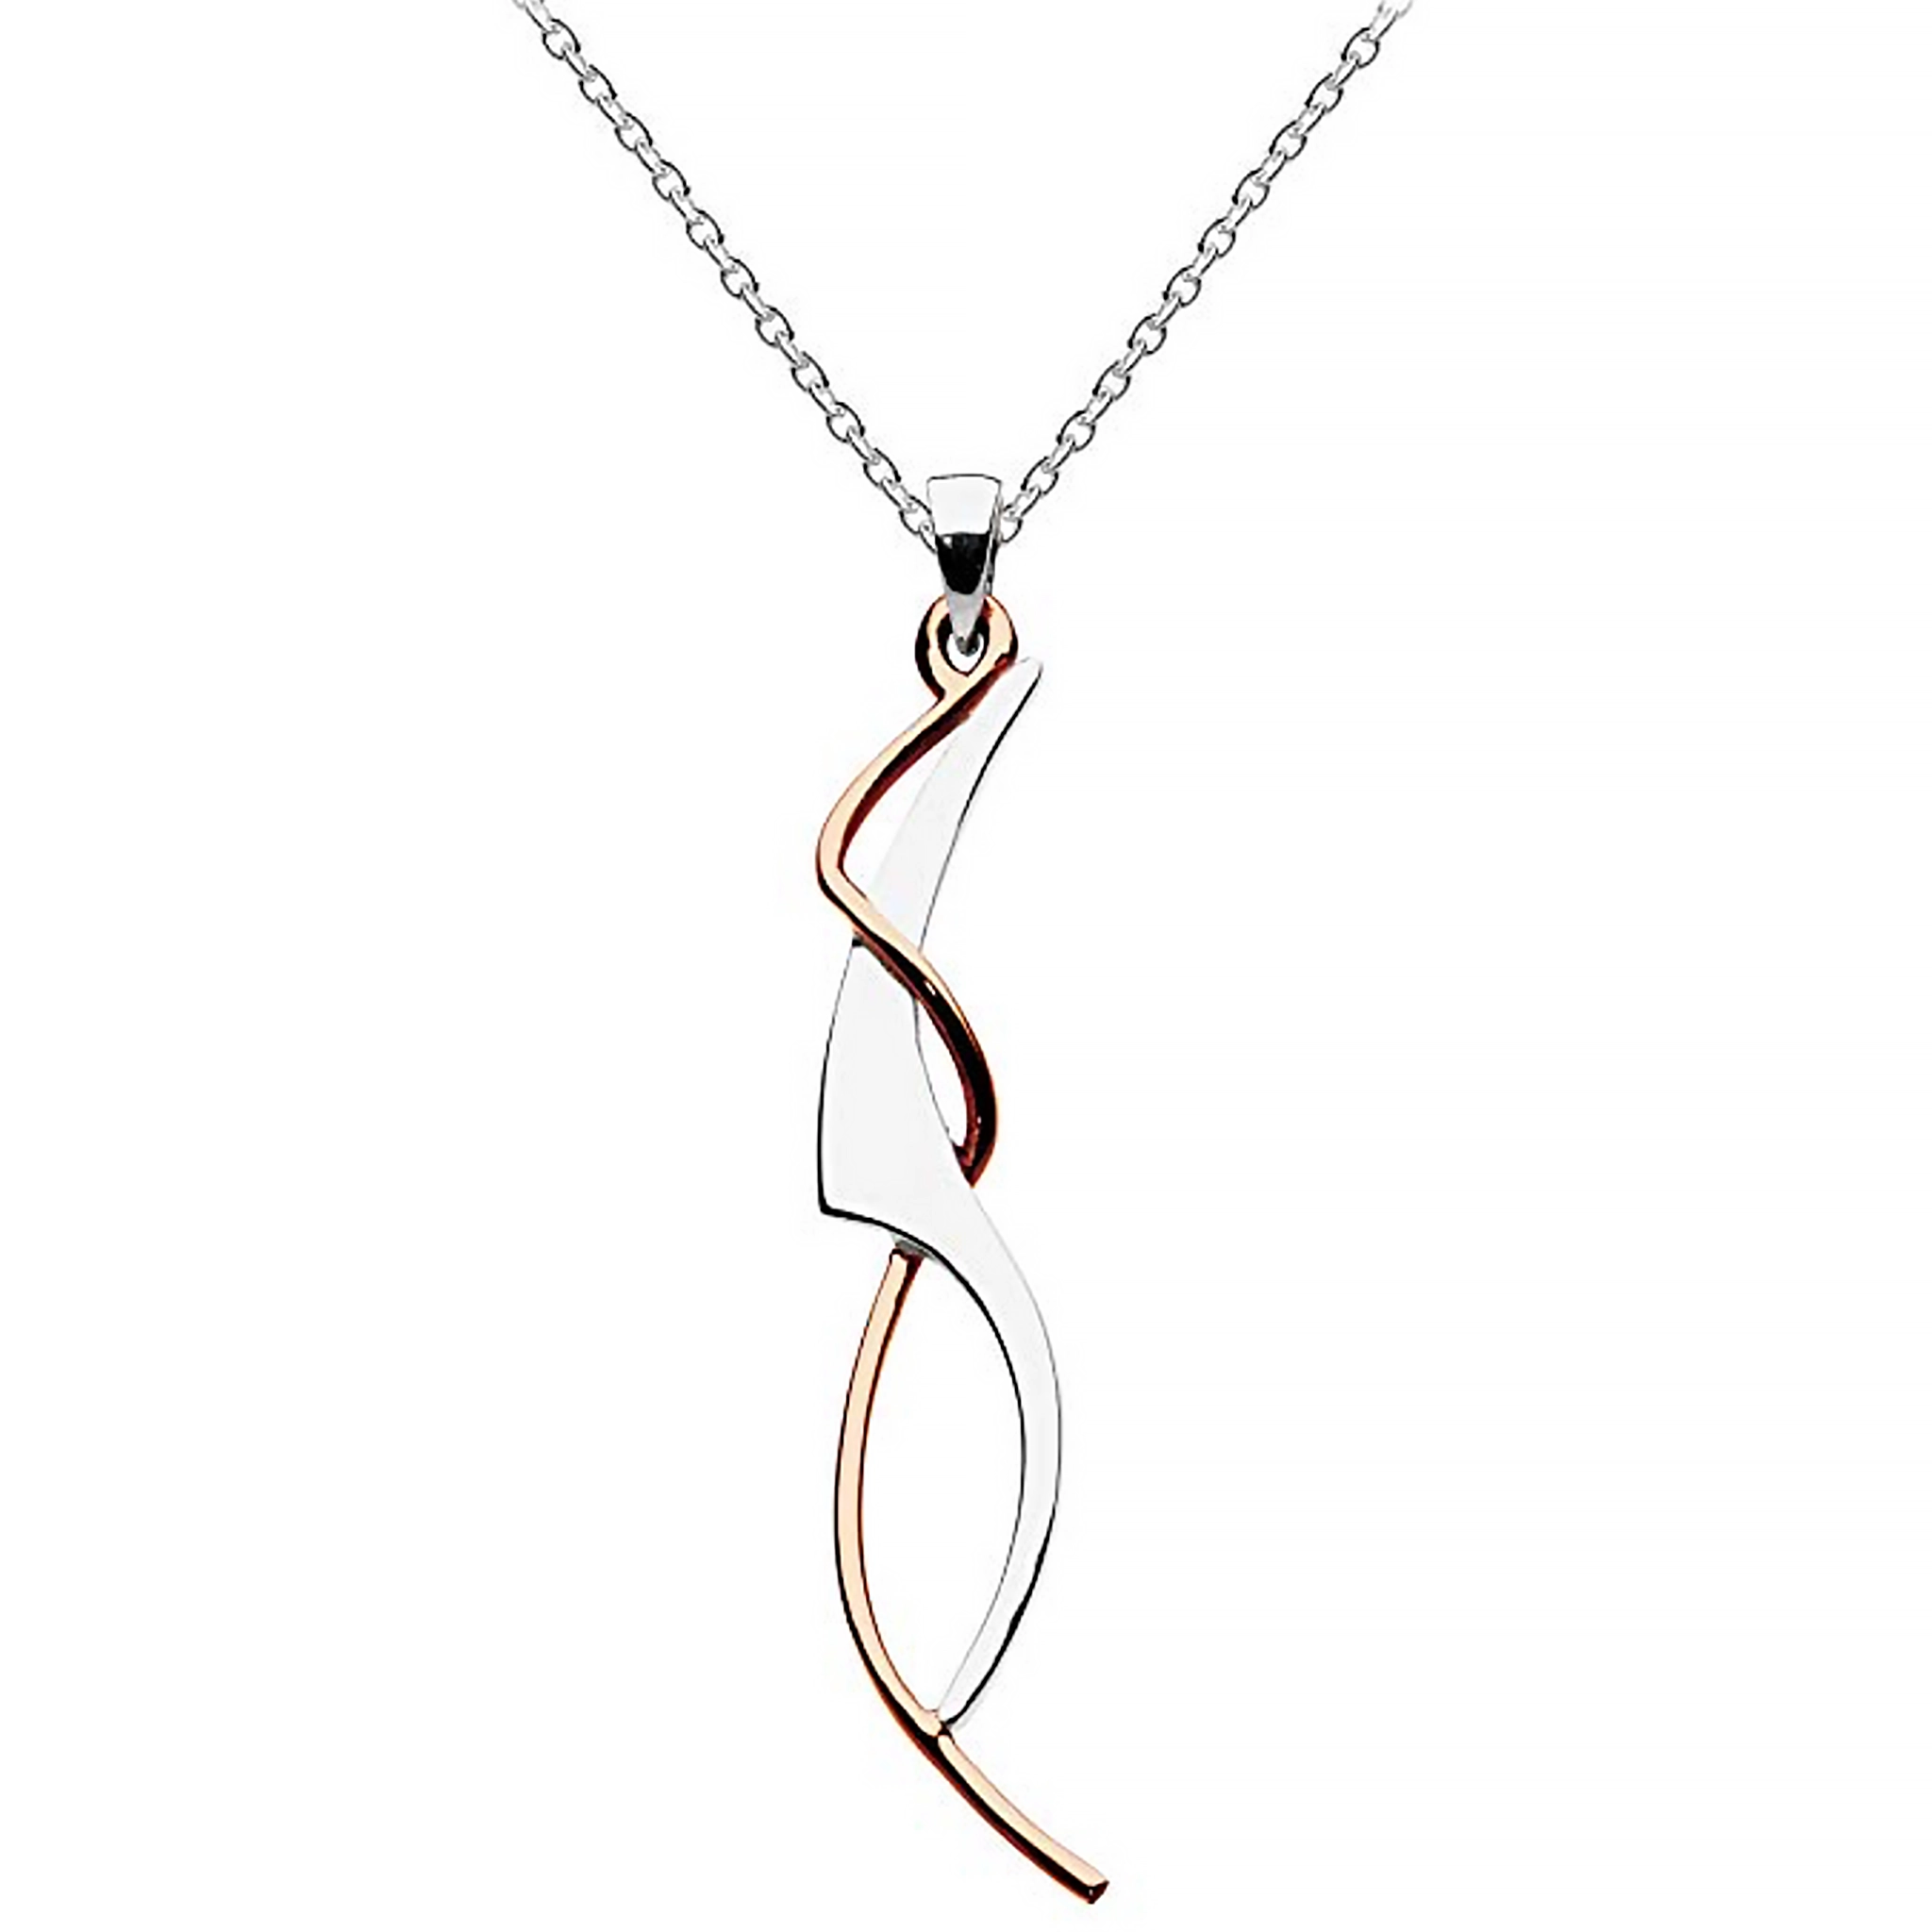 An art nouveau style pendant with a rose gold twist detail on polished silver